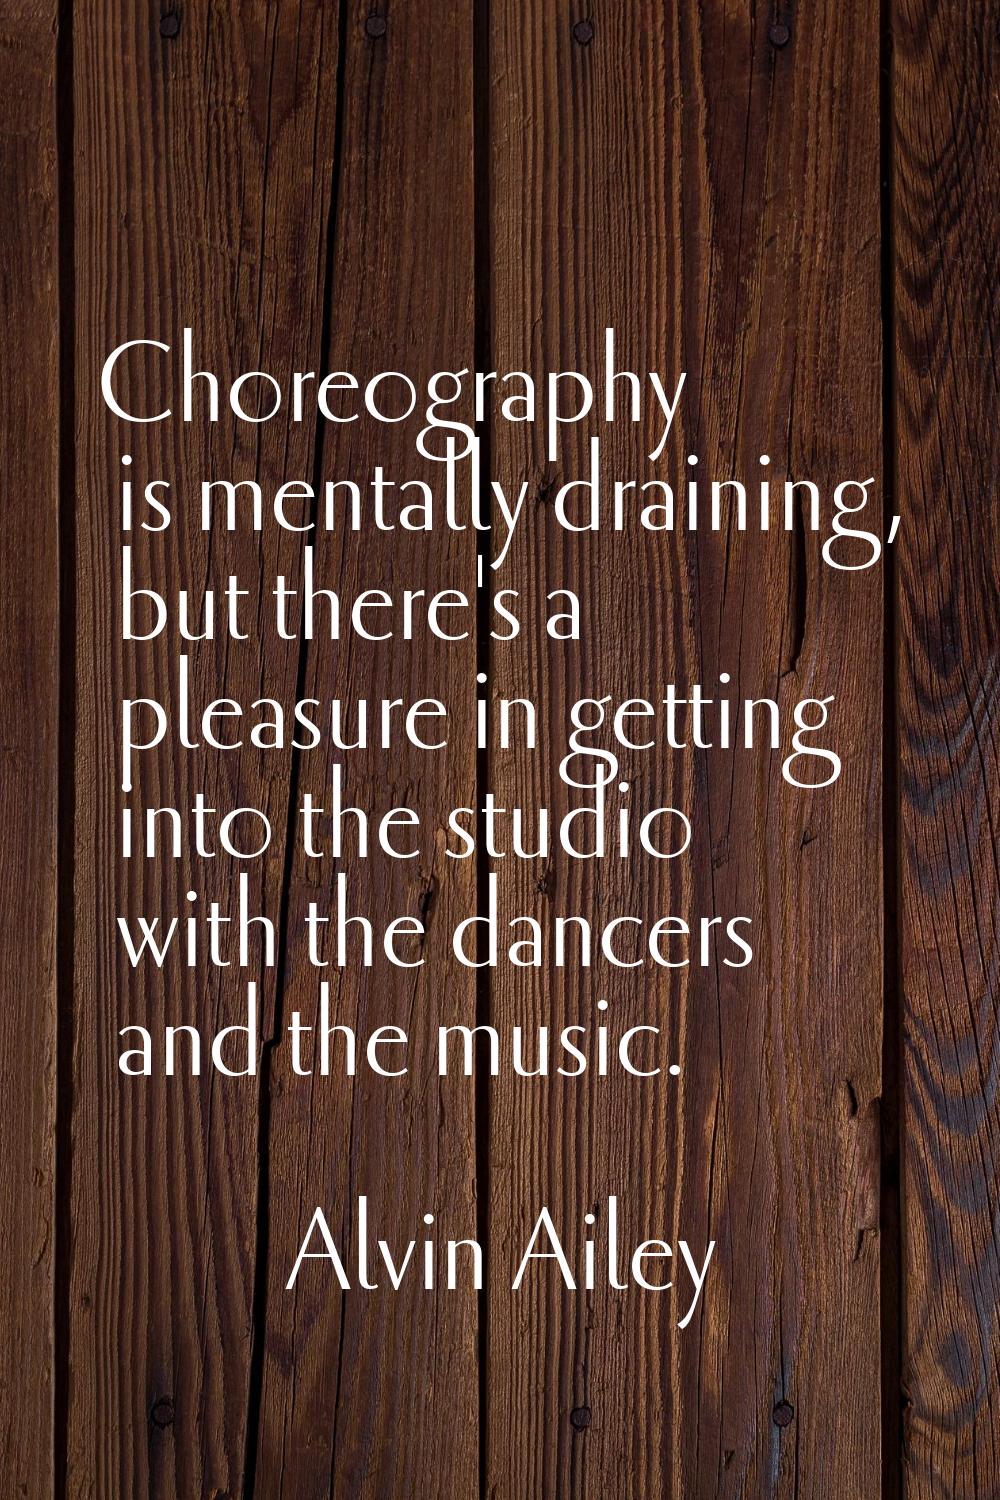 Choreography is mentally draining, but there's a pleasure in getting into the studio with the dance